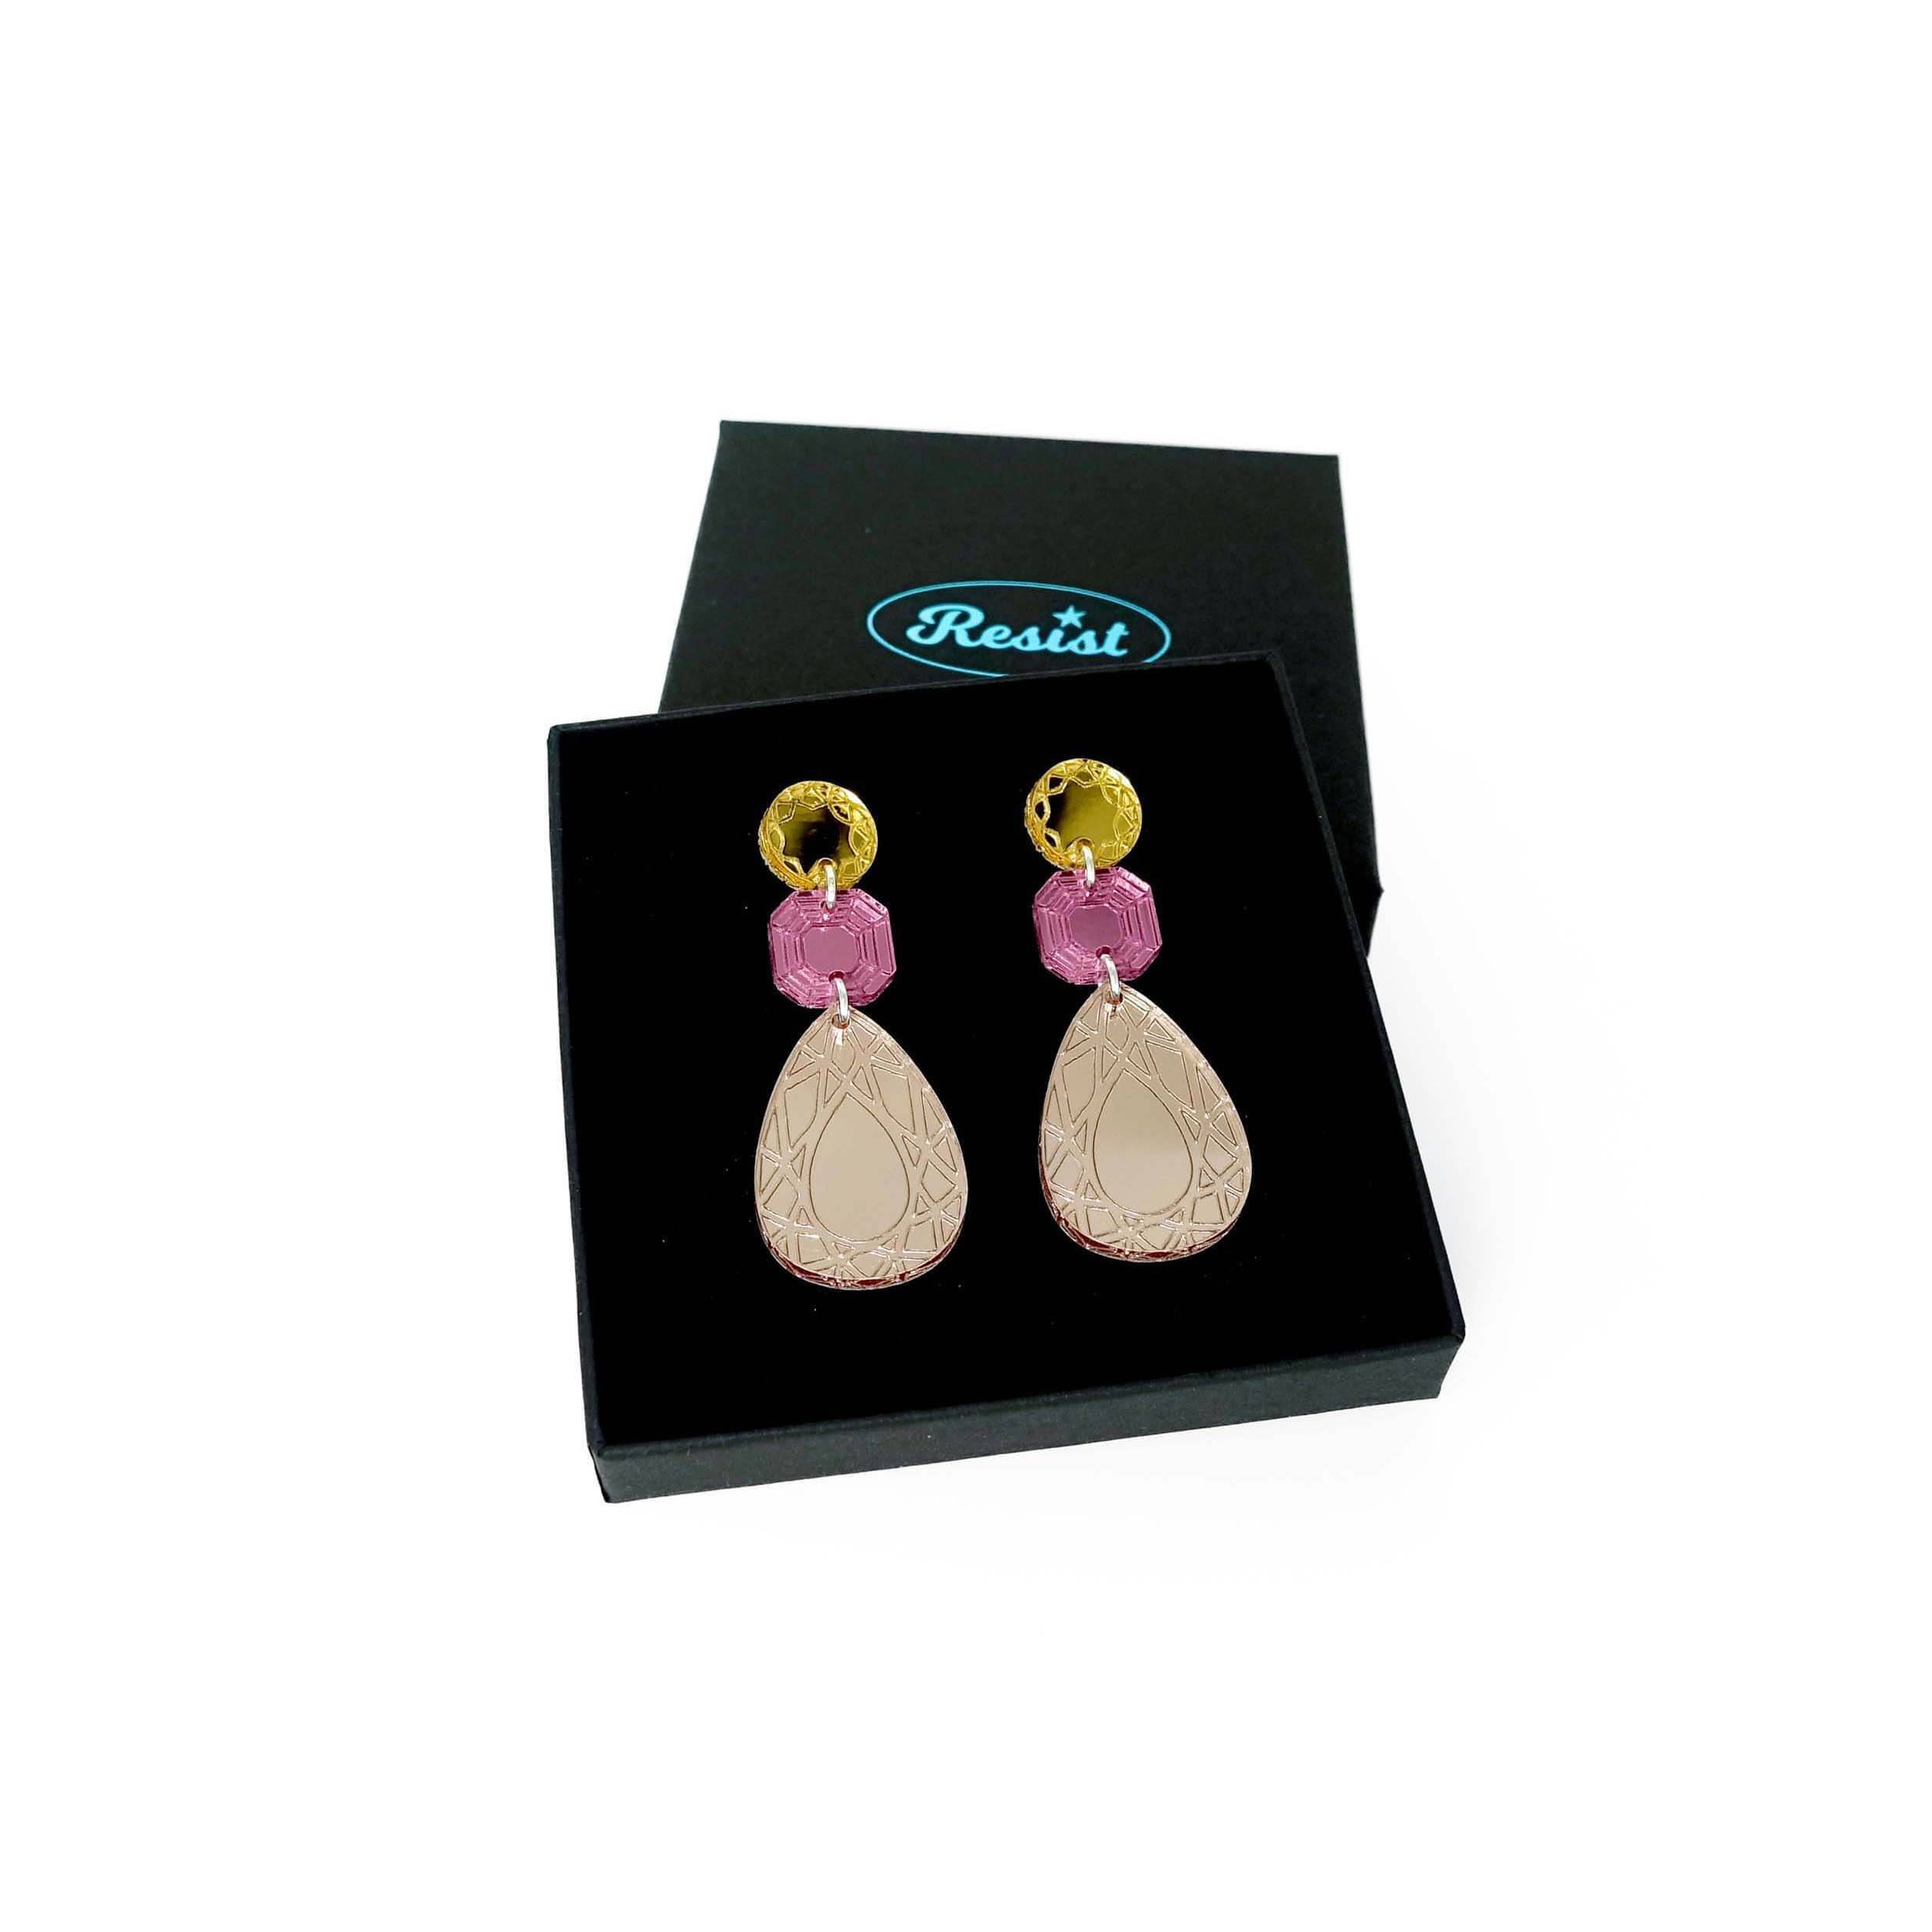 Large Belle Époque Jewel drop earrings in Rosey Gold: rose gold, pink and gold. Shown in a Wear and Resist gift box.  